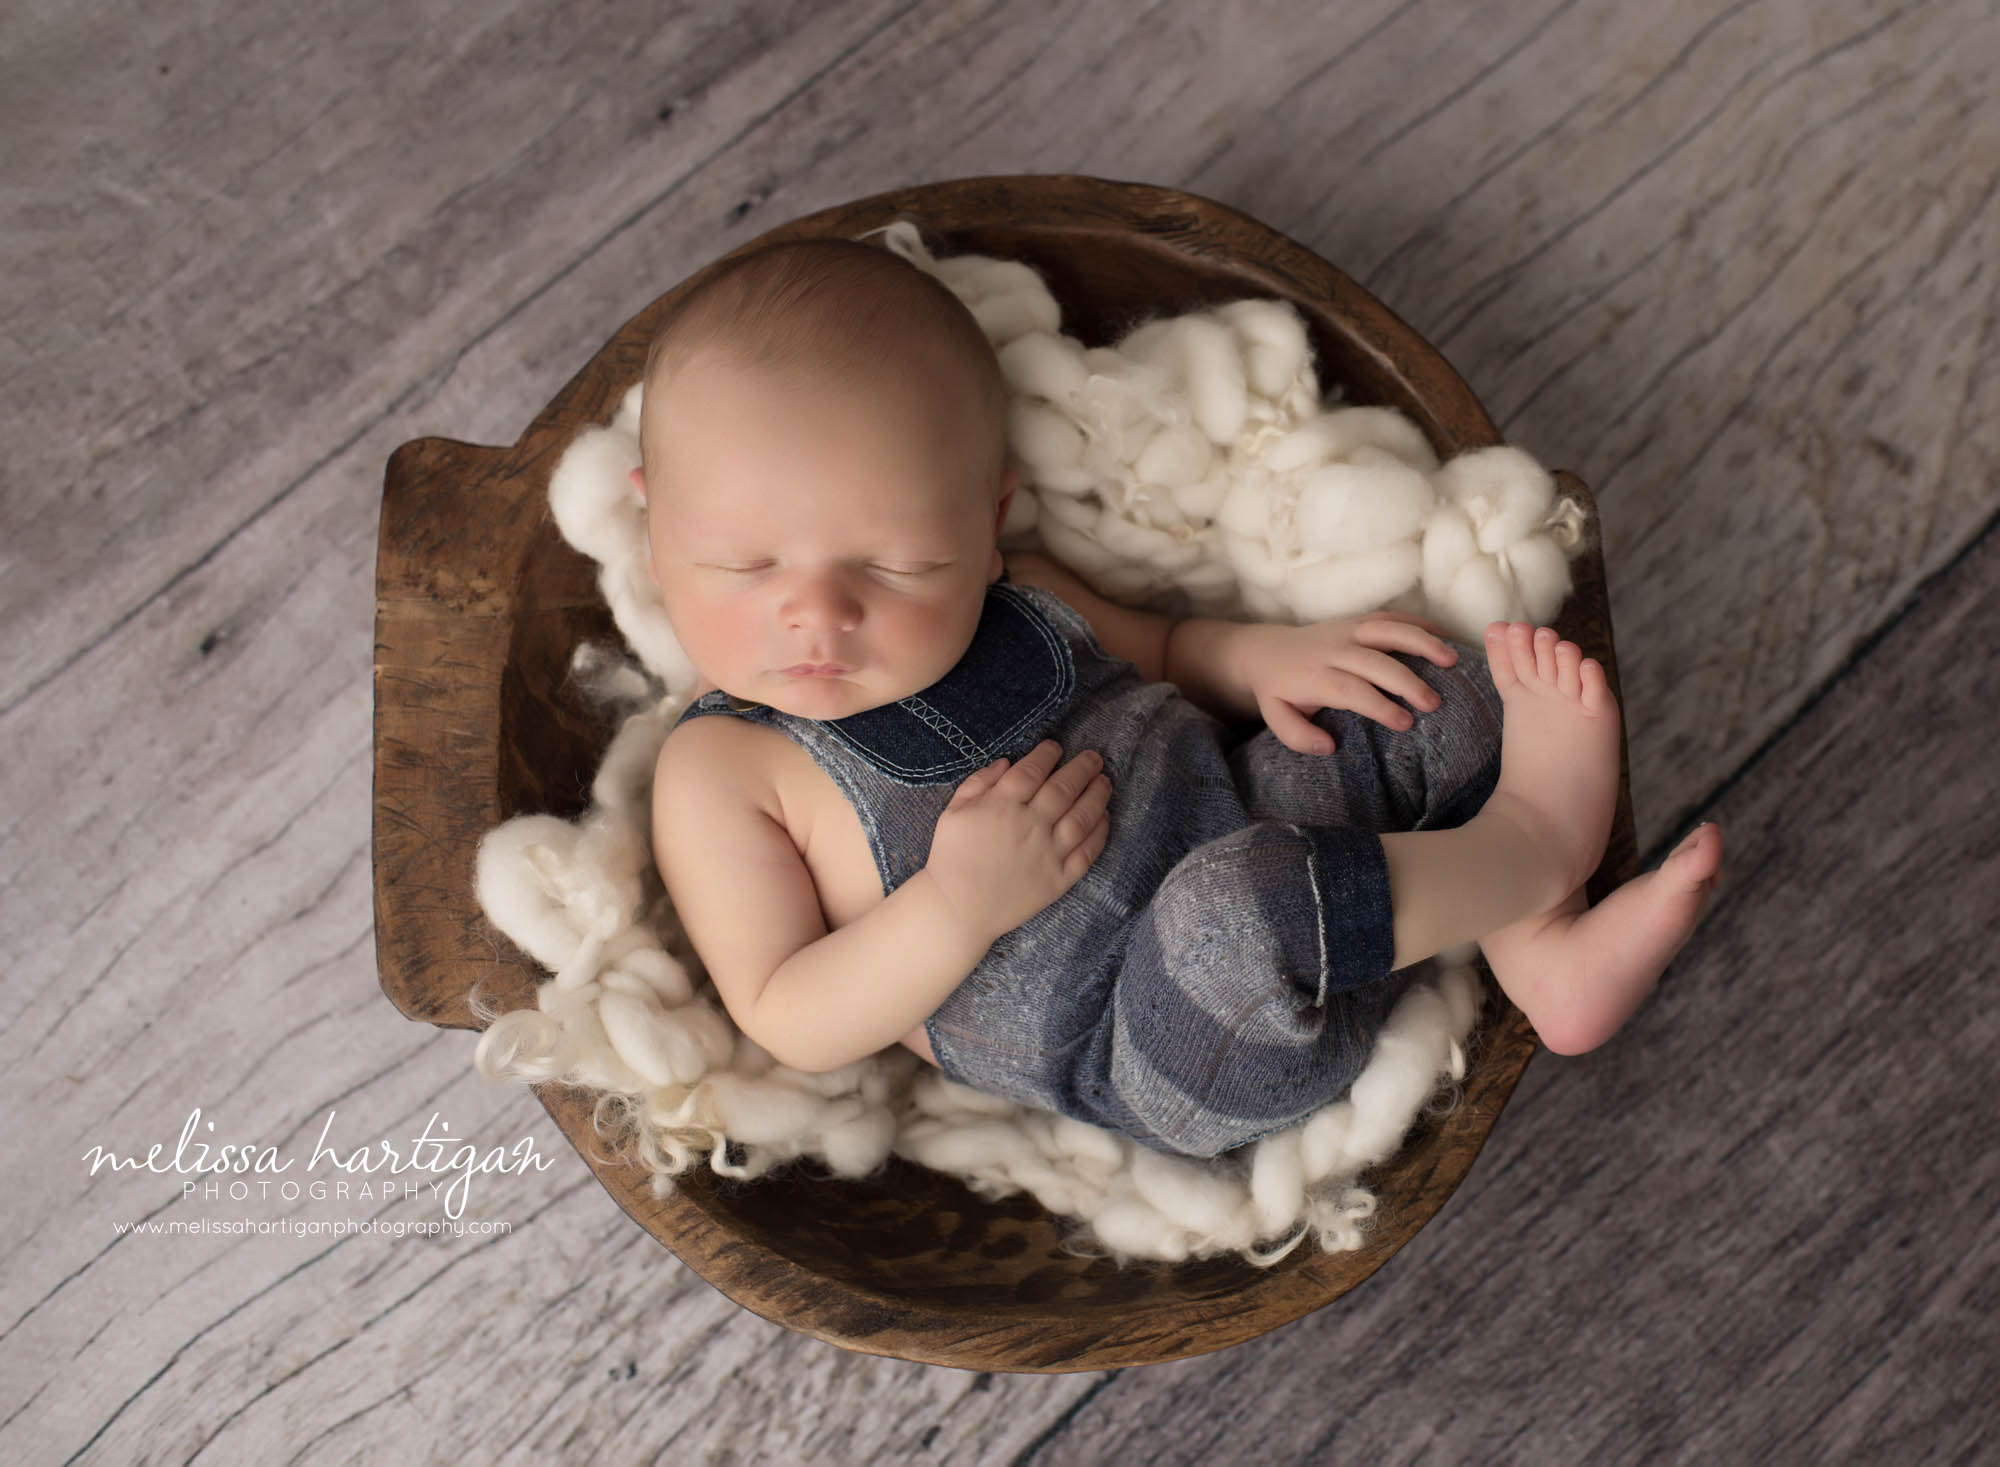 newborn baby boy wearing outfit and posed in wooden bowl with cream fluff